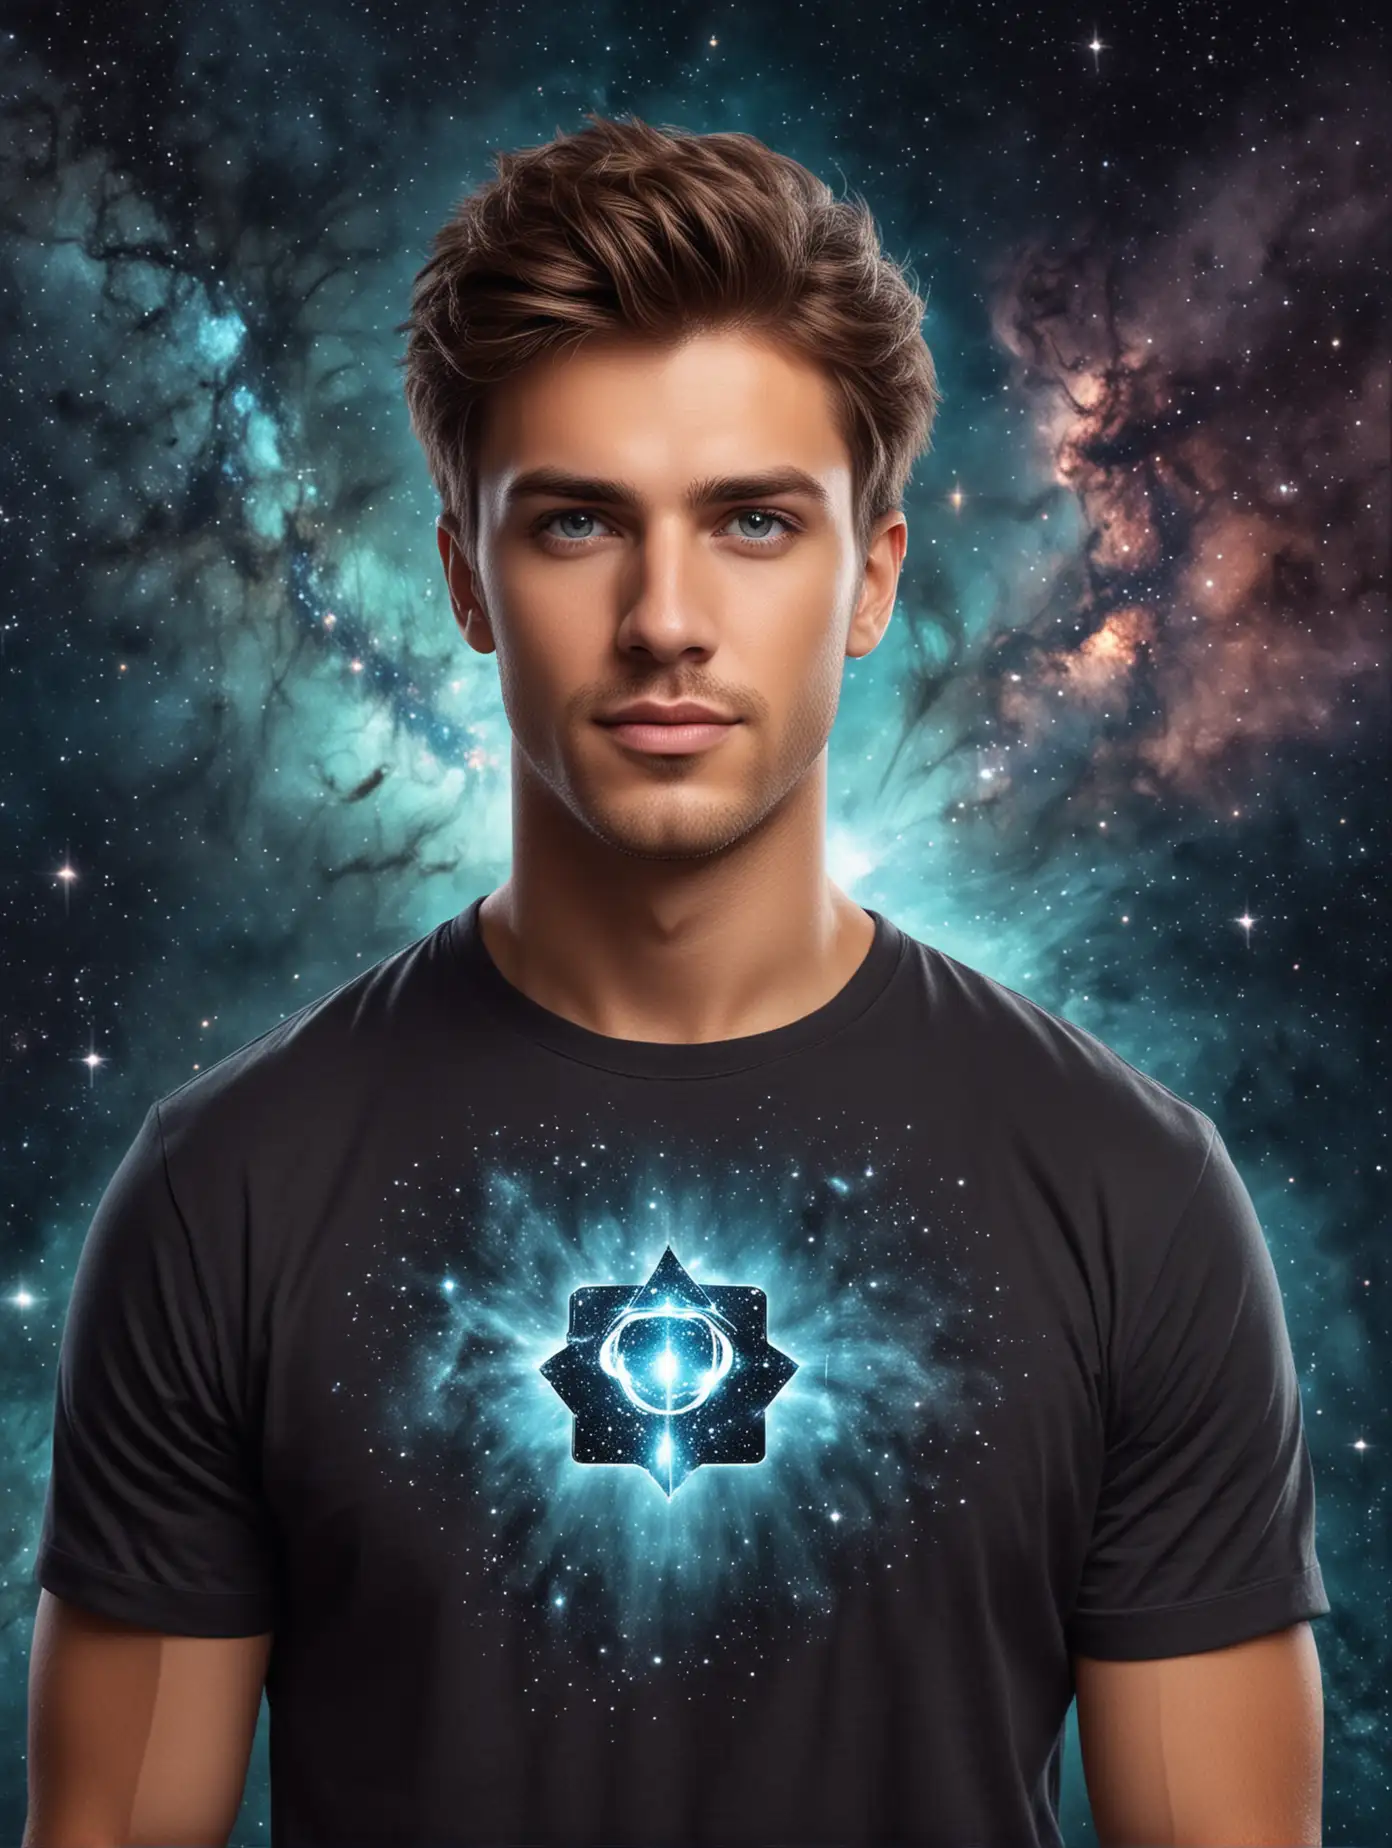 Handsome Man with Aquamarine Eyes and All Symbol Tshirt in Space Nebula Portrait